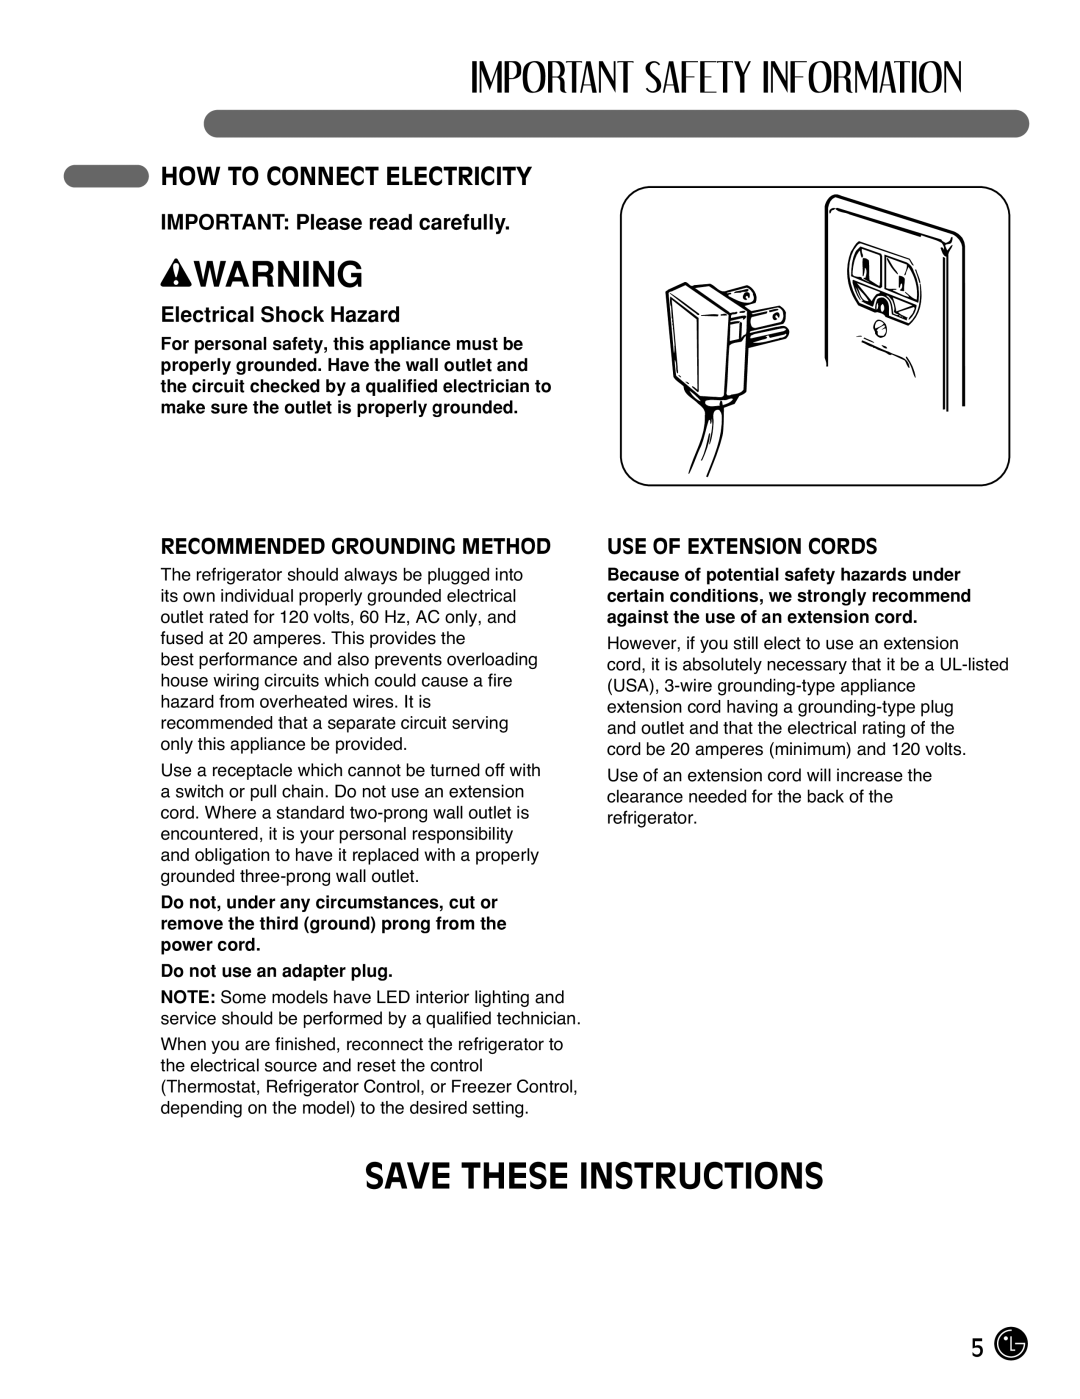 LG Electronics LMX2525971 Save These Instructions, How To Connect Electricity, IMPORTANT: Please read carefully, wWARNING 